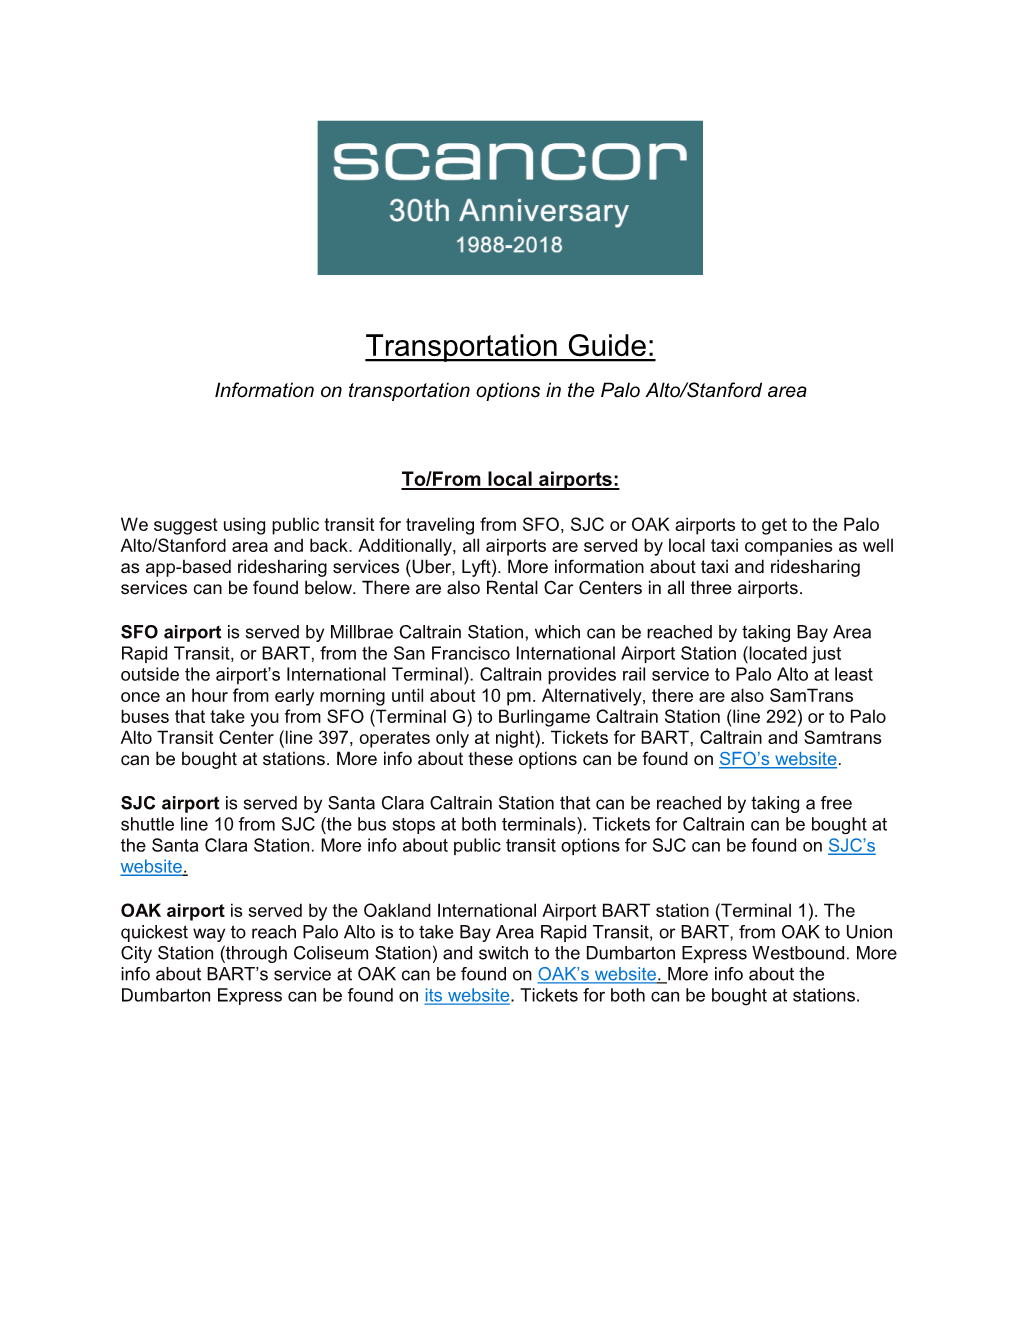 Transportation Guide: Information on Transportation Options in the Palo Alto/Stanford Area